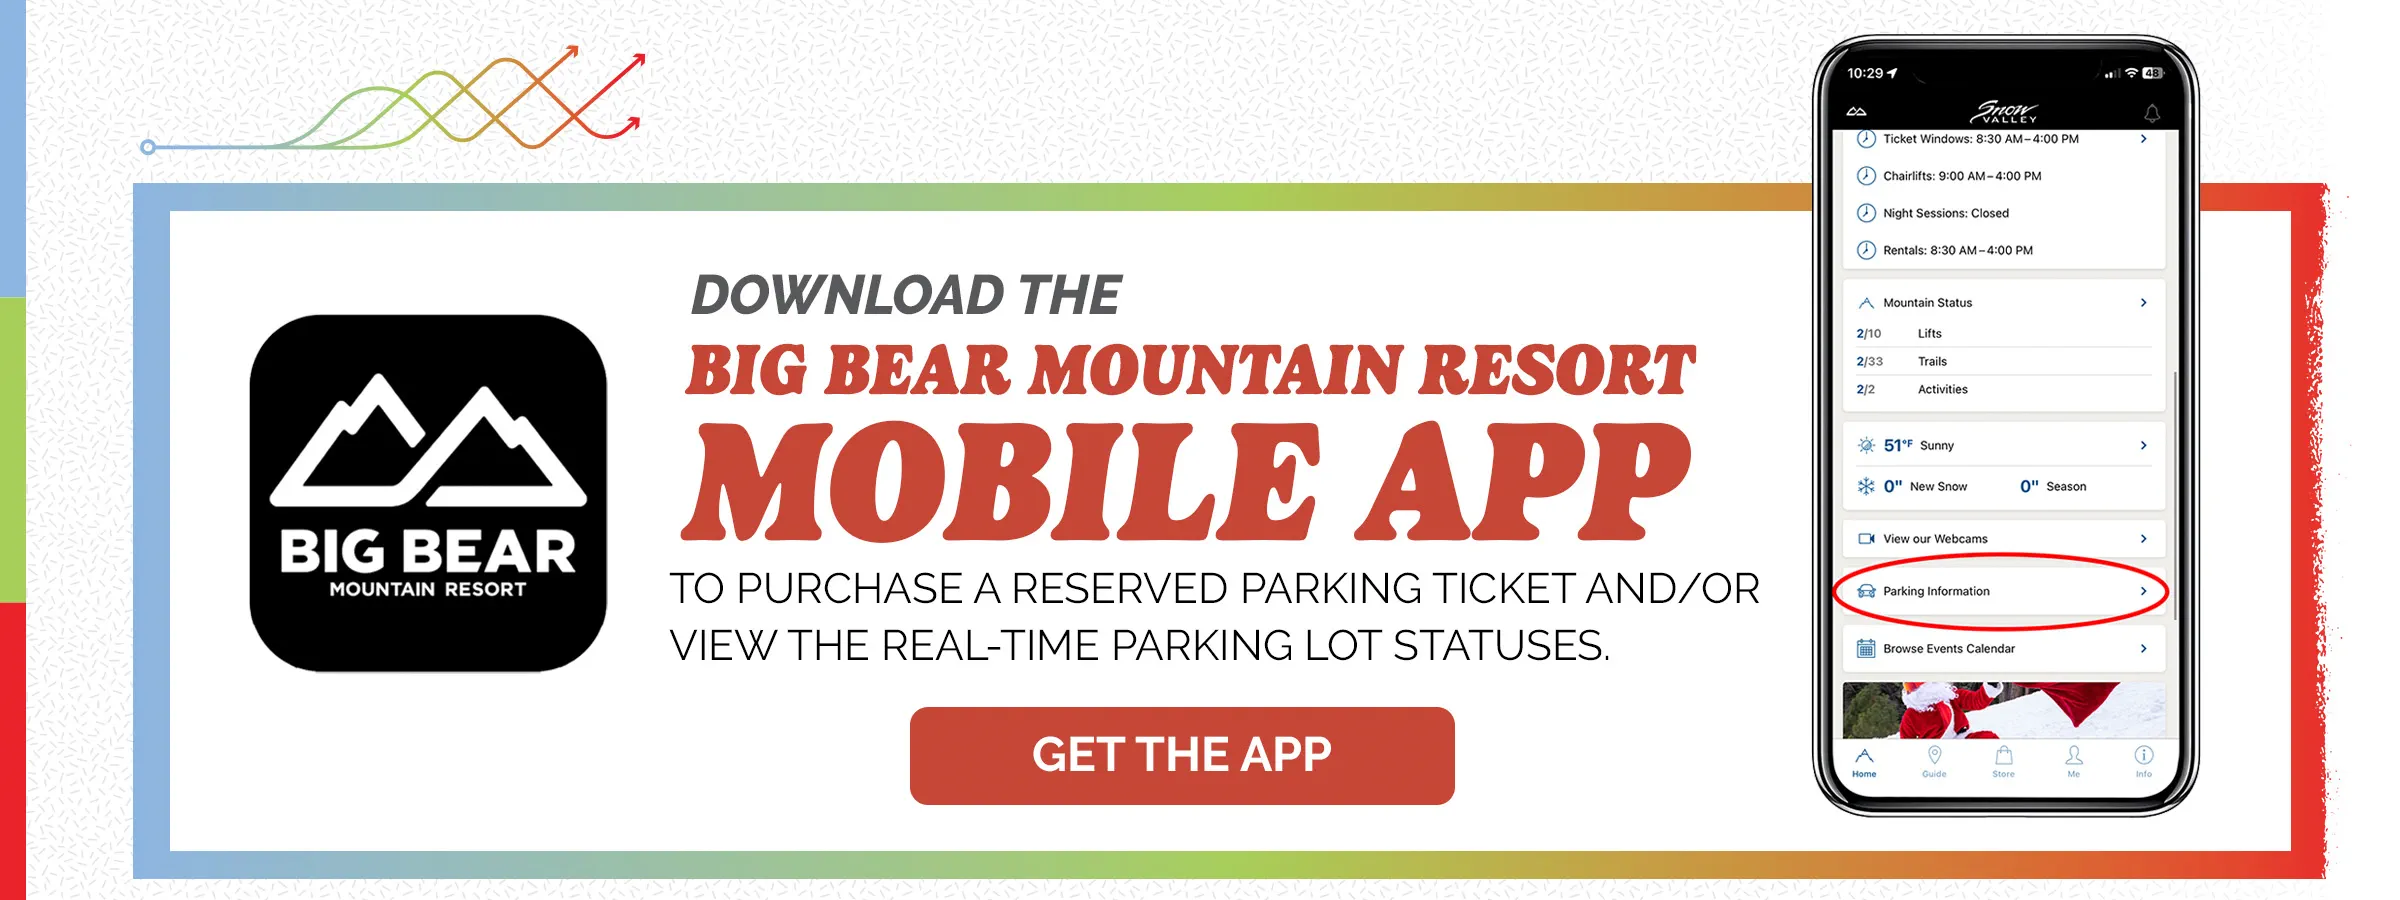 Download the Big Bear Mountain Resort Mobile App to purchase reserved parking tickets and or view the status